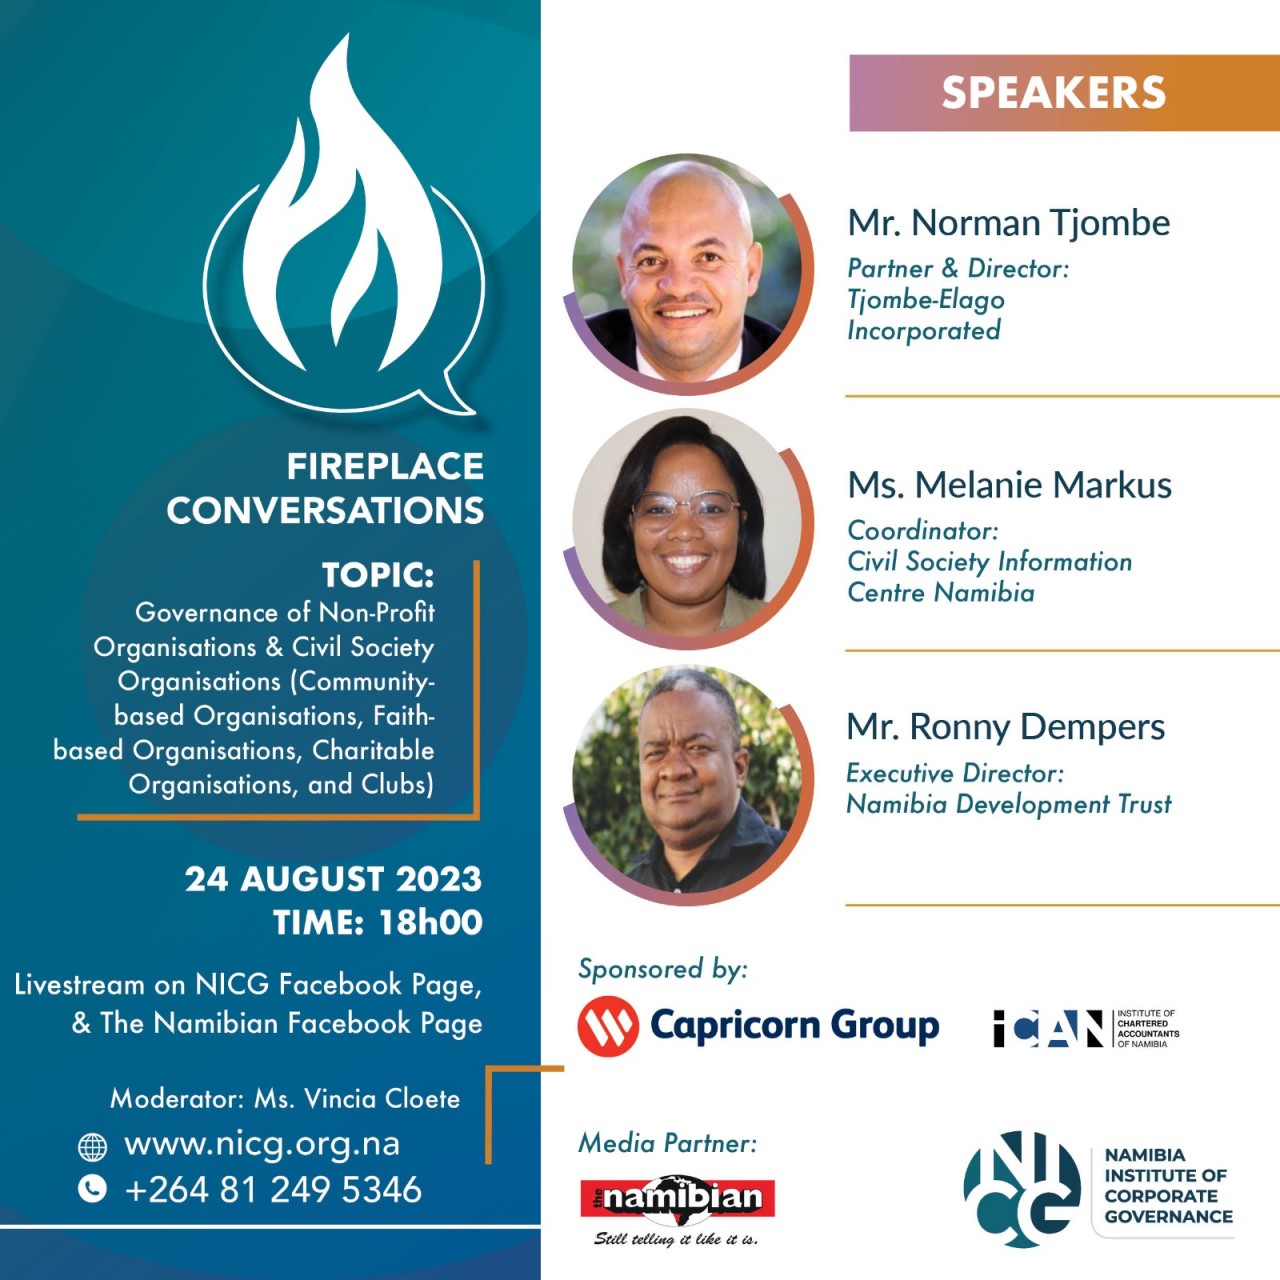 NICG-FIREPLACE-CONVERSATIONS-Governance-of-NPOs-and-CSOs-24-August-2023